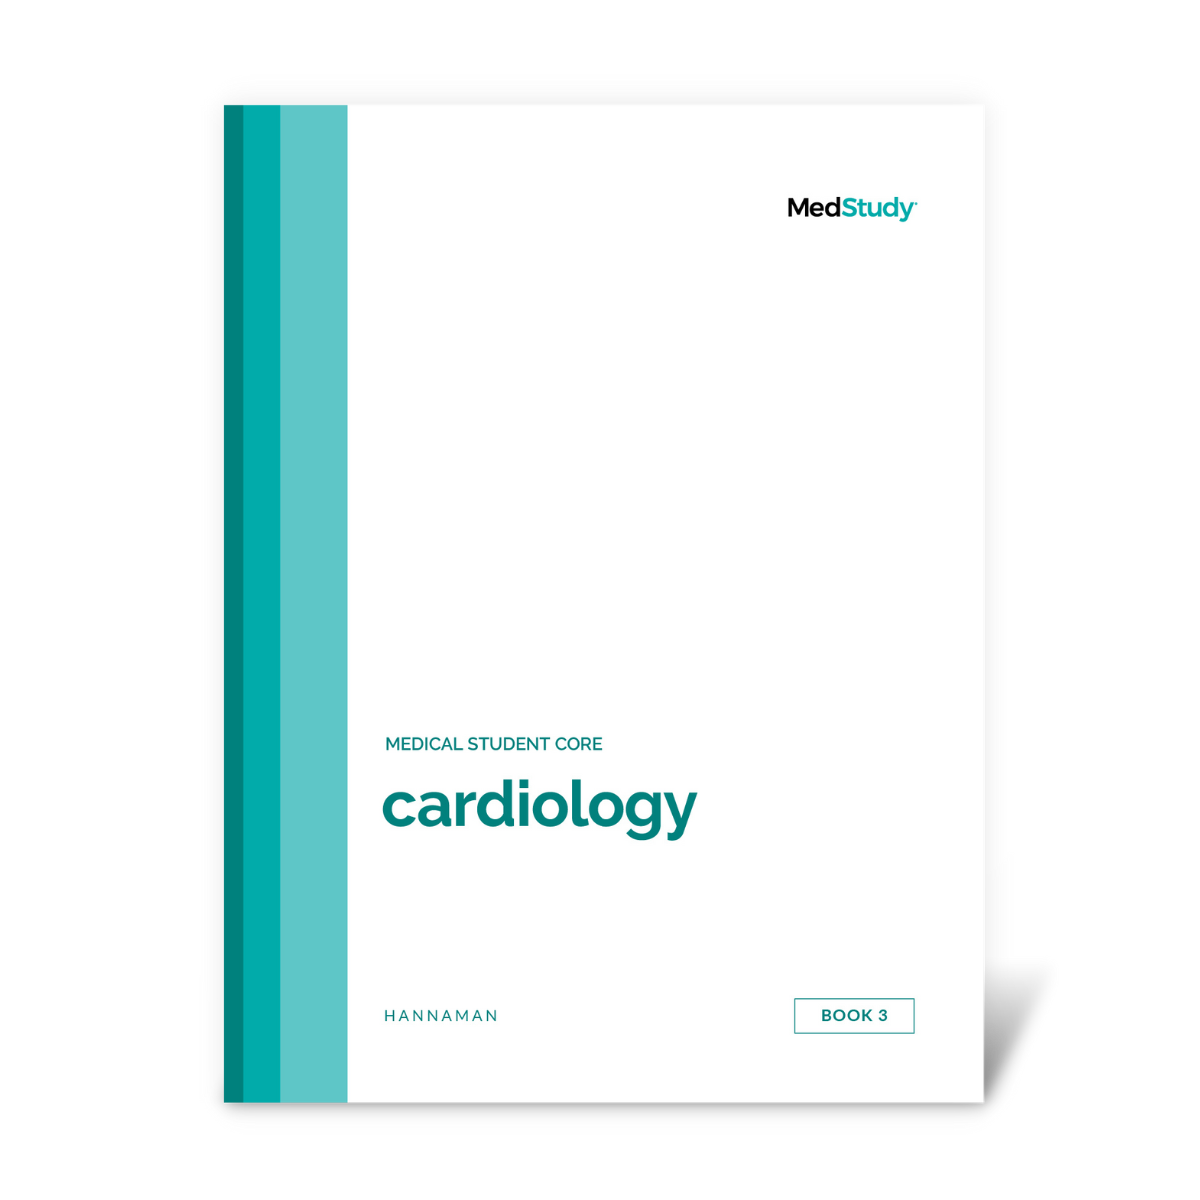 Cardiology book cover with green variant of stripes down the left side